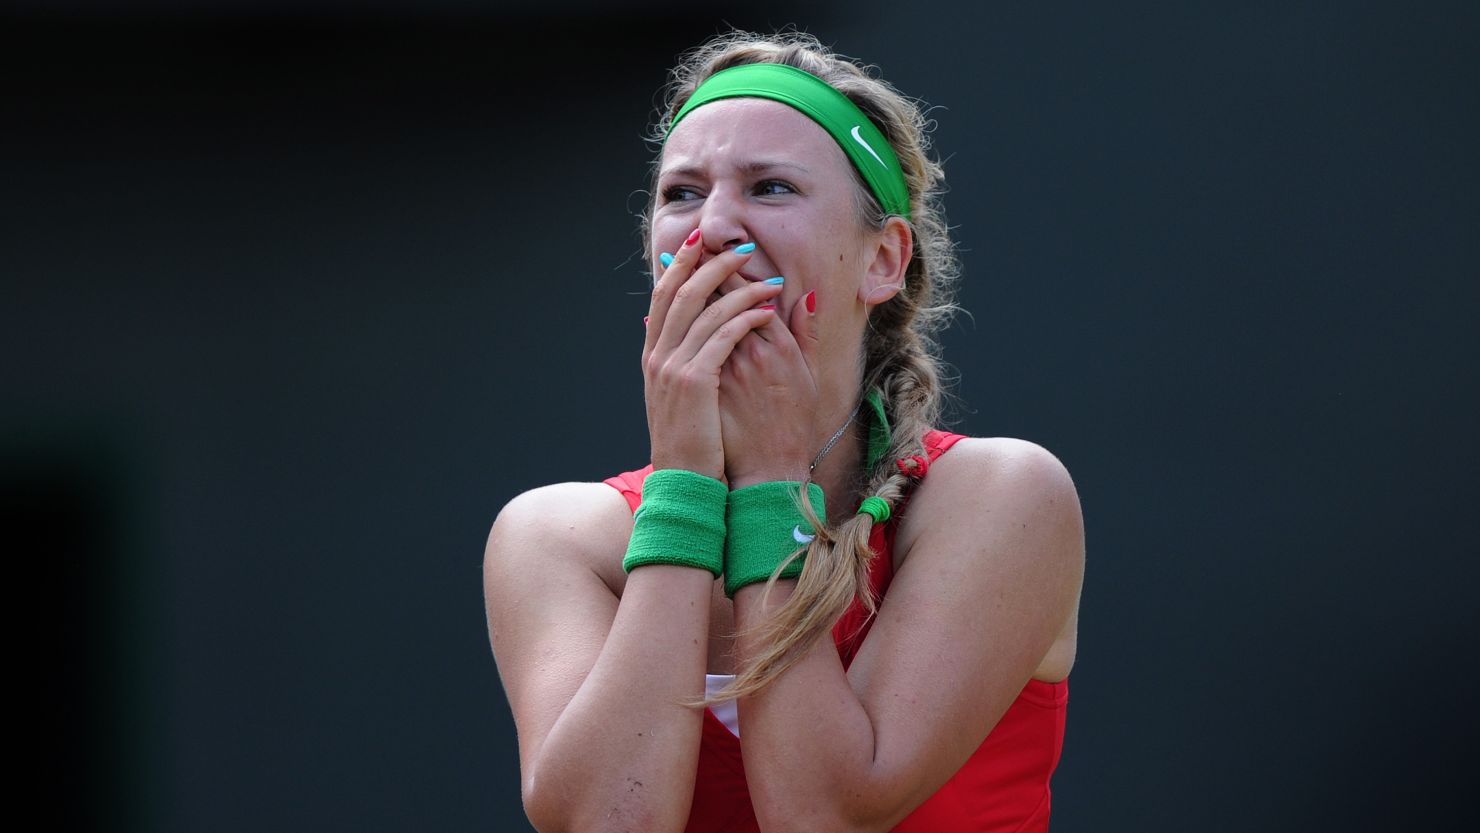 Top-ranked Victoria Azarenka is a big doubt for the U.S. Open, which starts on August 27.